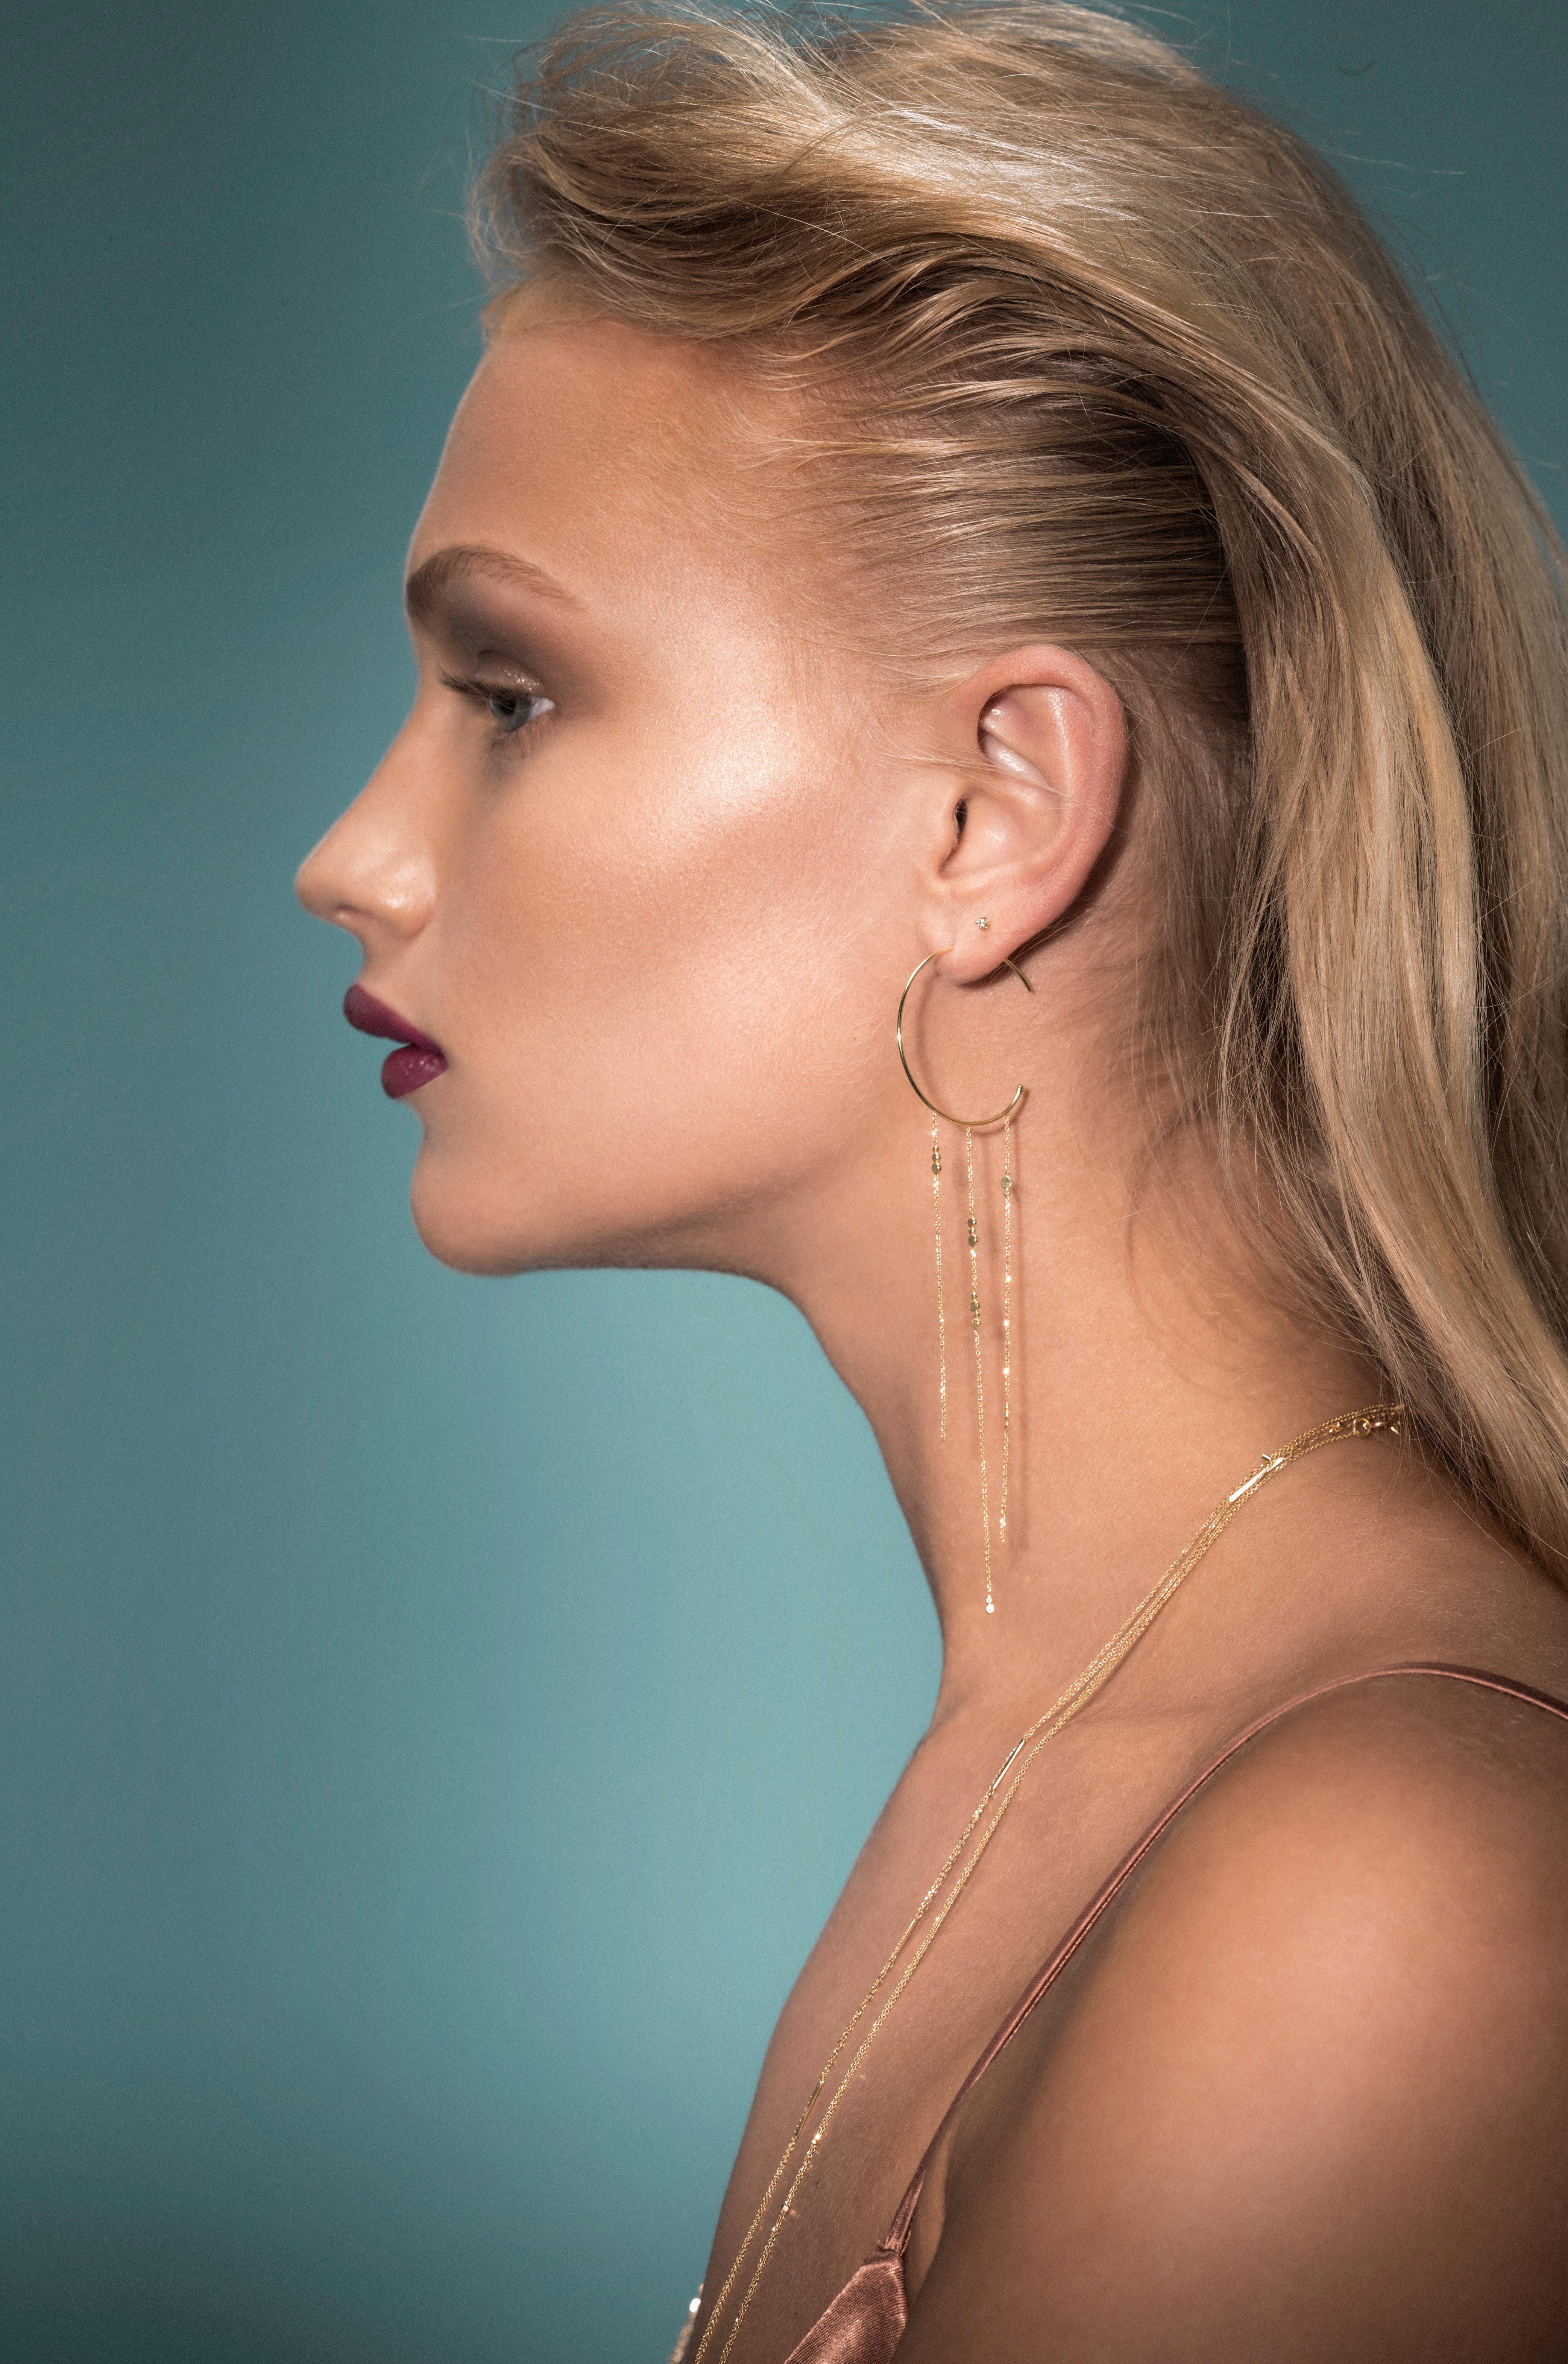 Made from 18k yellow gold, these fabulous 3cm diameter hoop earrings feature three strands of diamond cut chain scattered with small disc embellishments, a glamorous addition to any outfit! The length of the longest strand of chain is 8.5cm. These